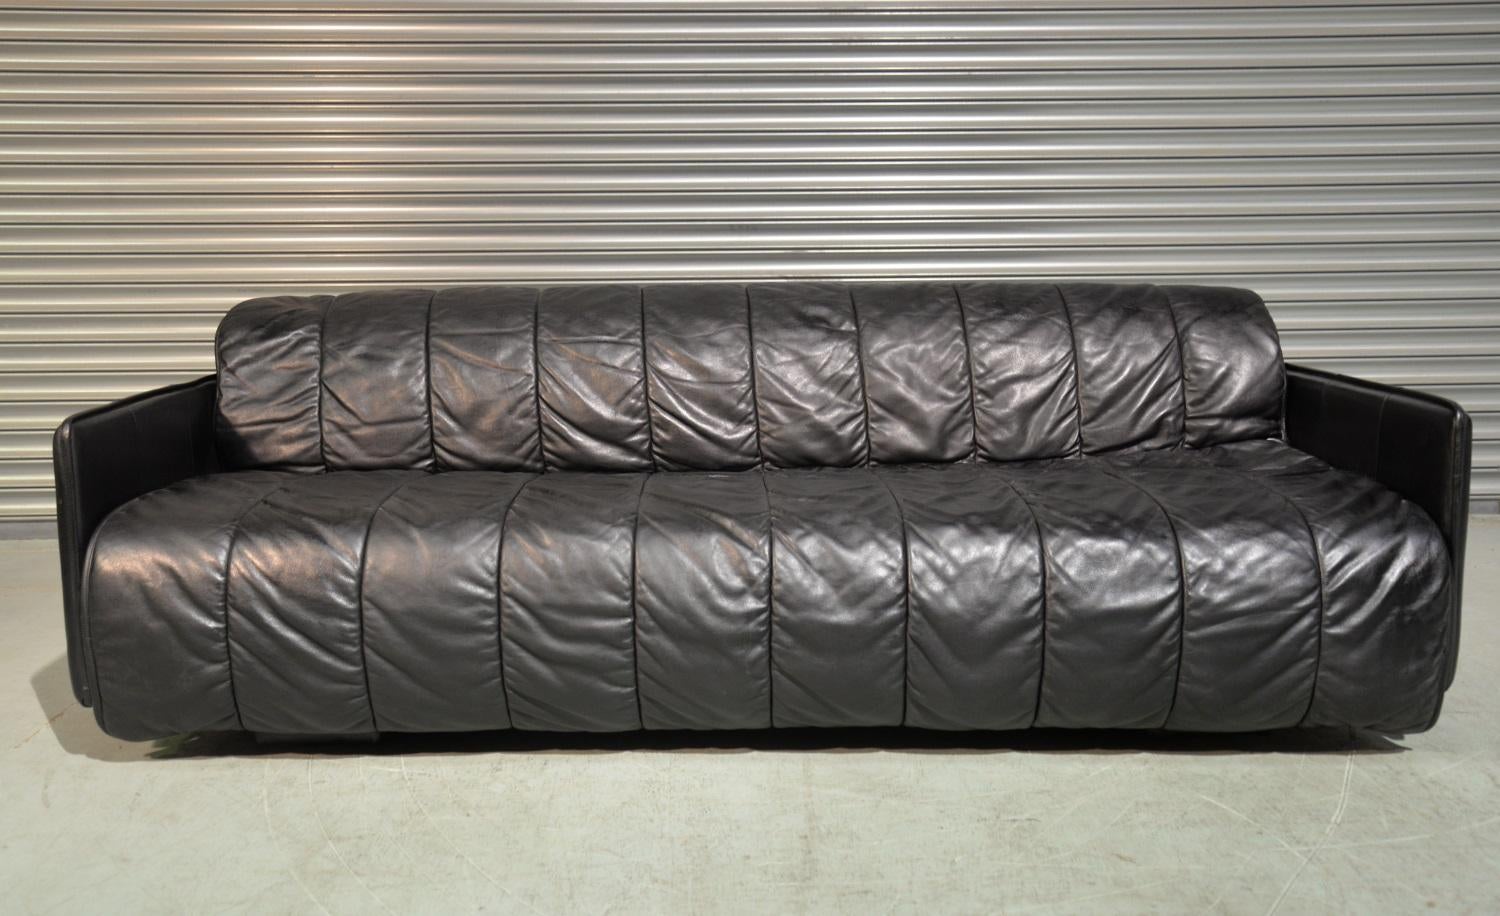 We are delighted to bring to you an ultra rare vintage De Sede sofa bed. Handmade by De Sede craftsman in Switzerland, this convertible sofa bed is upholstered in stunning soft black quilted aniline leather. It's amazingly comfortable, the front